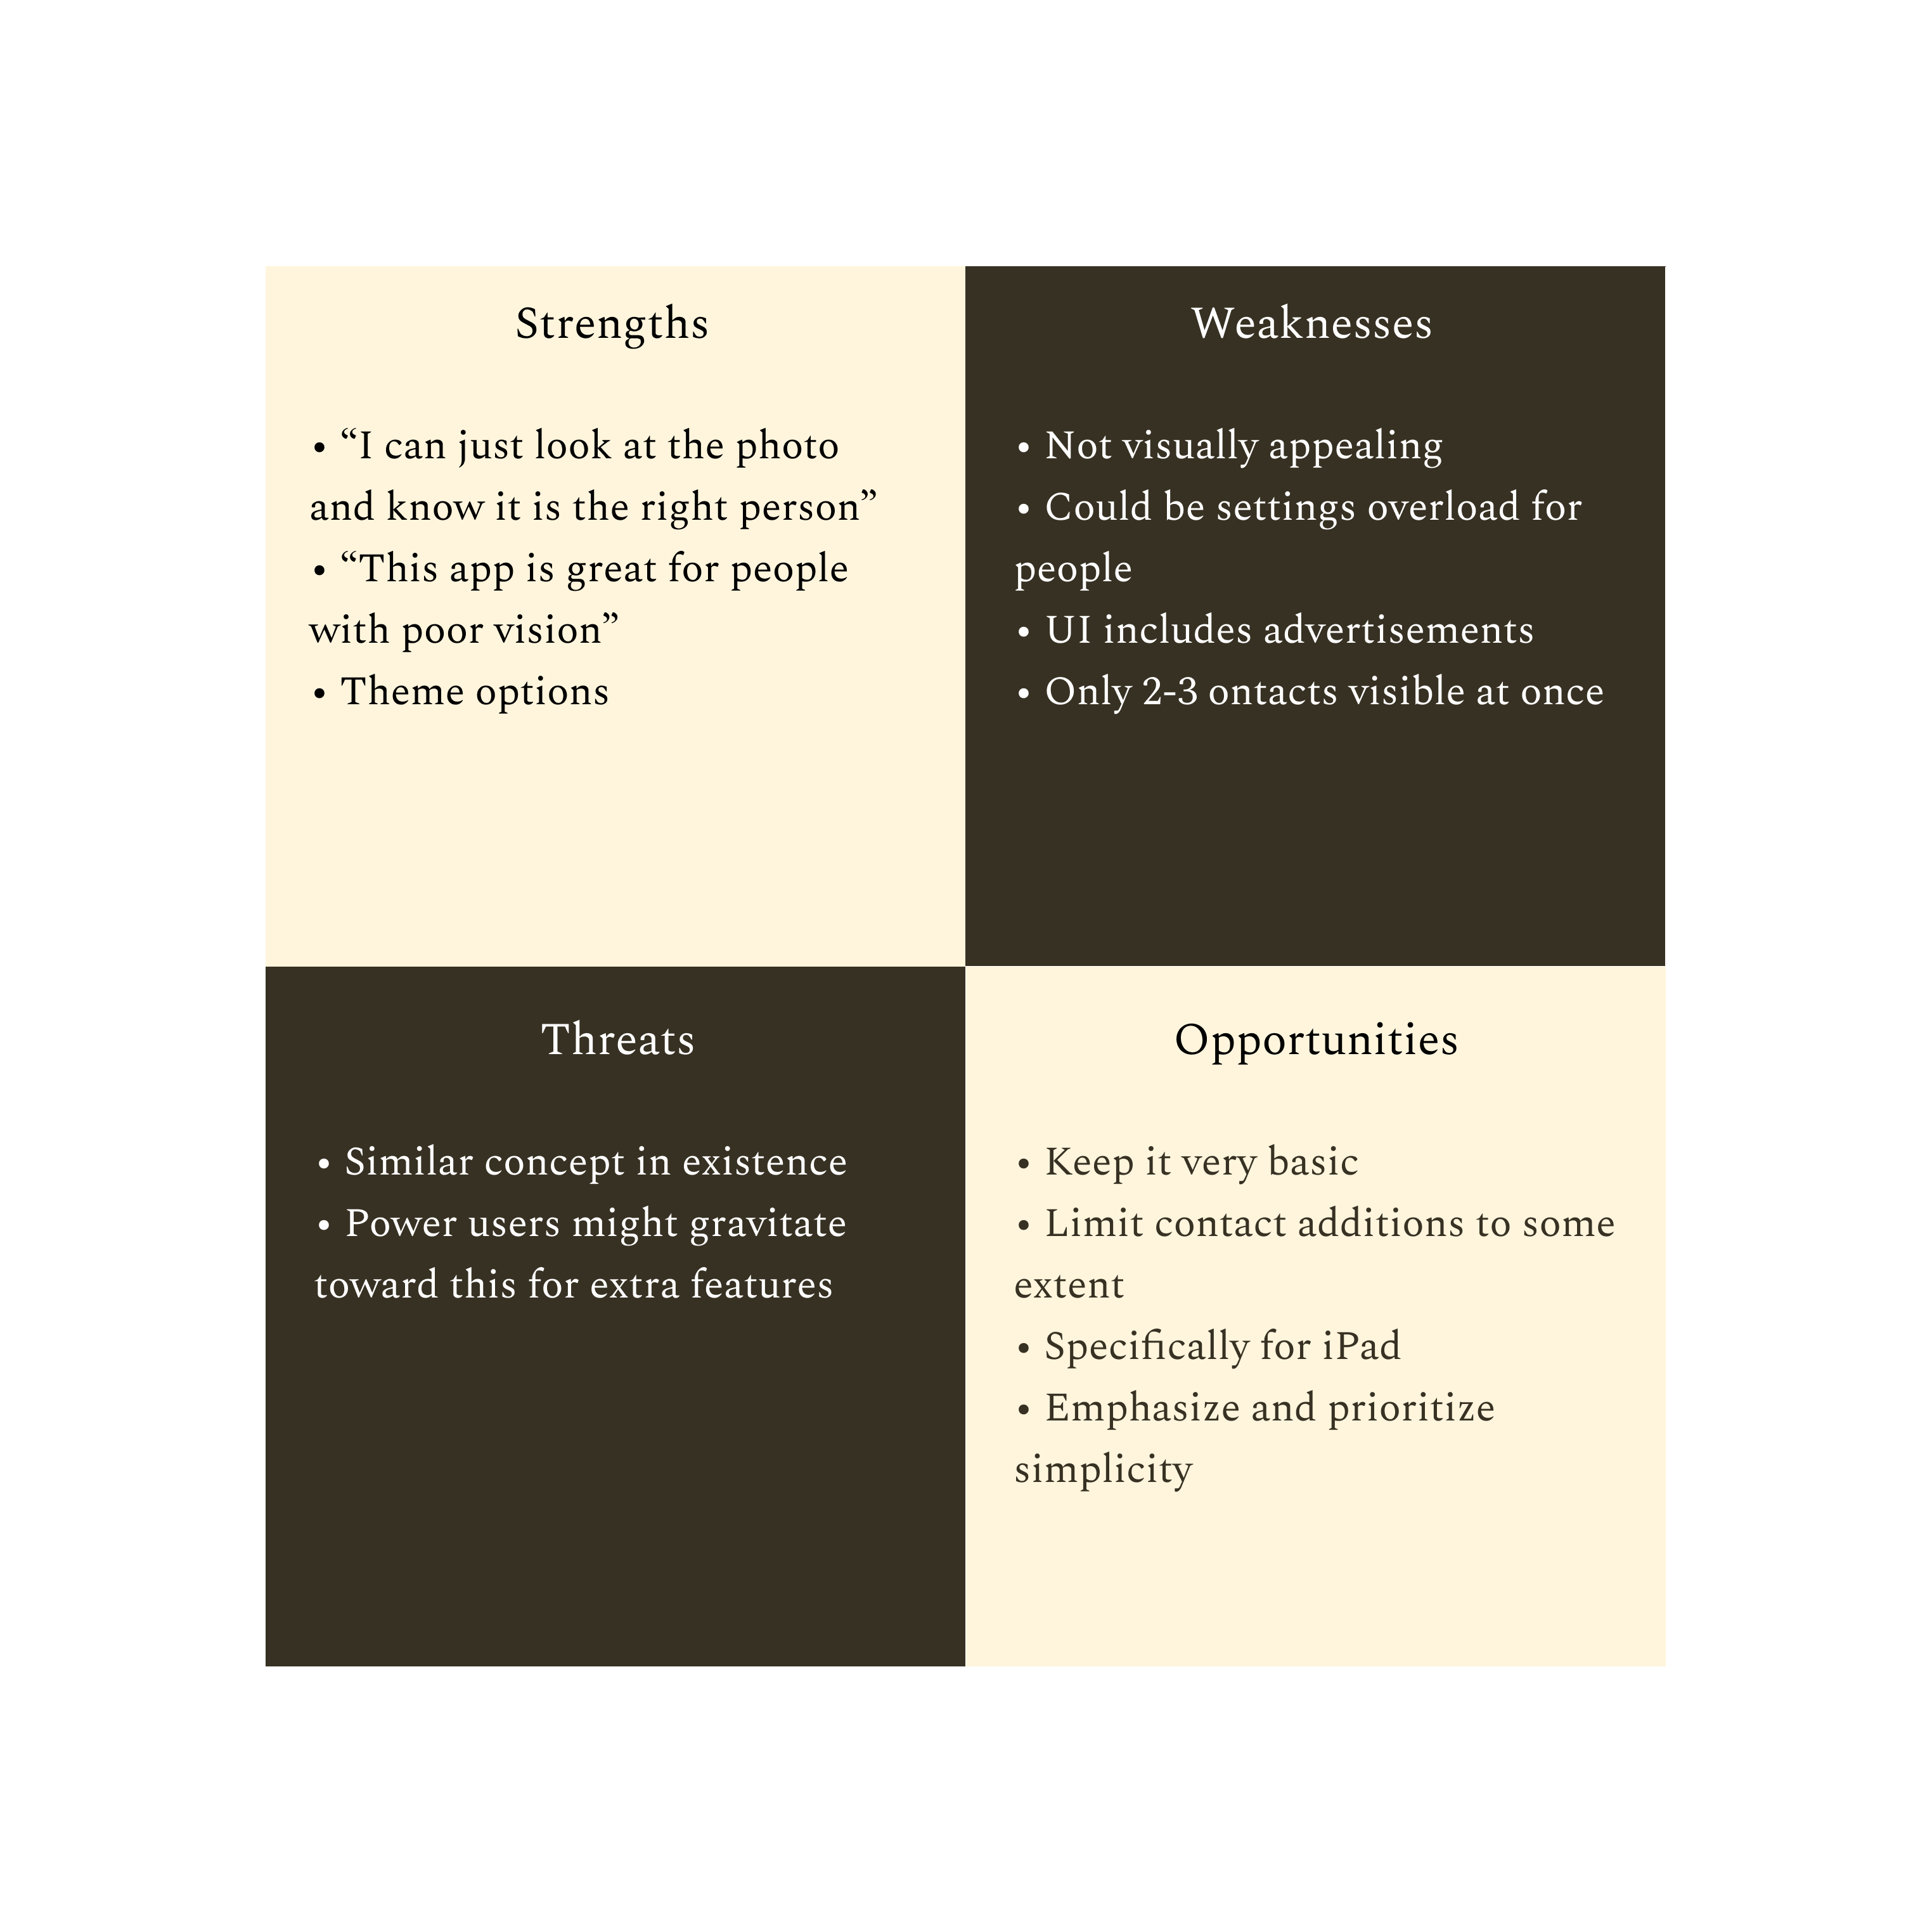 A SWOT Analysis of an app called Portrait Caller for iOS.